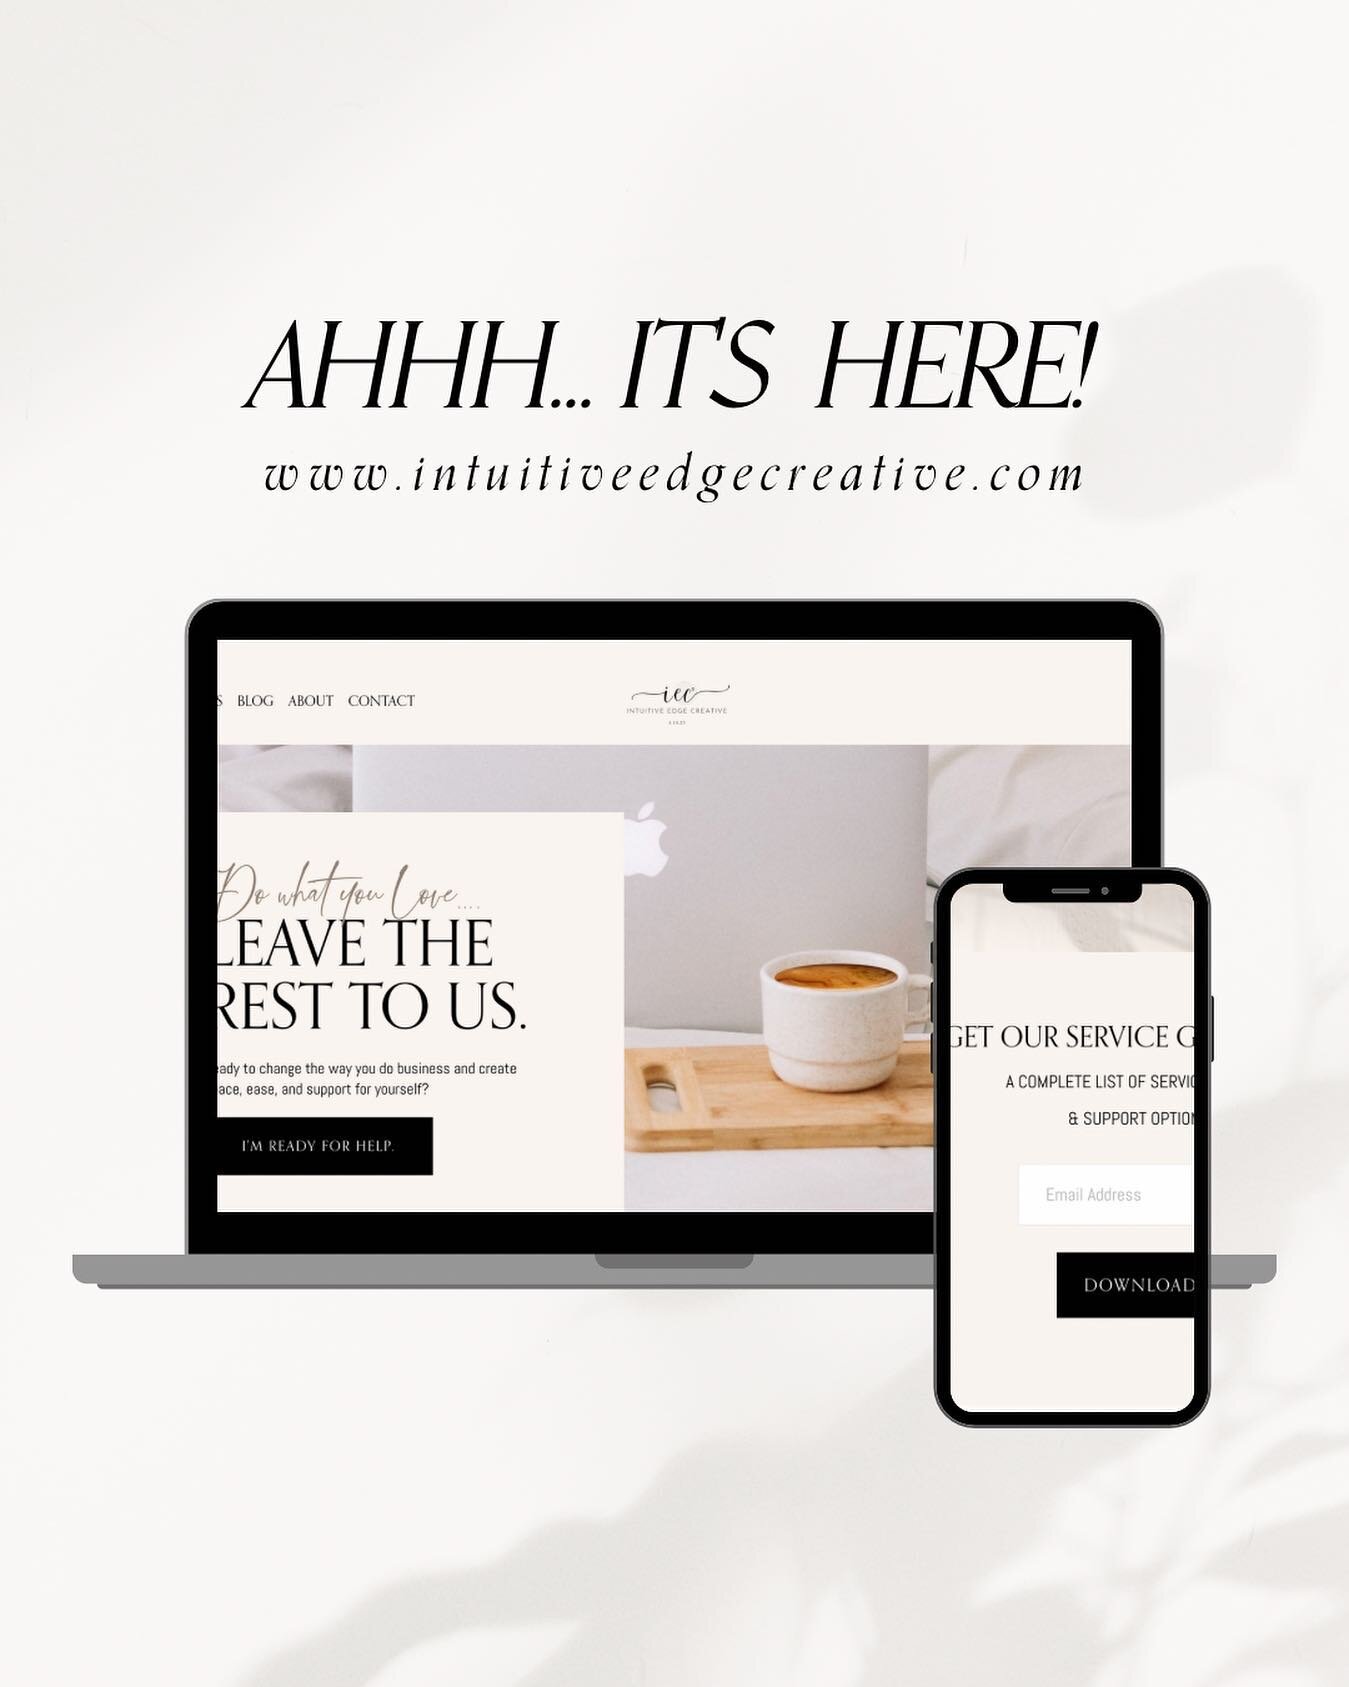 The Delegate To Elevate event yesterday was AMAZING - thank you to those who came live.
For everyone else, we announced at the event that WE. ARE. HERE! Intuitive Edge Creative is open for business.

Take a look at our website, download our service g